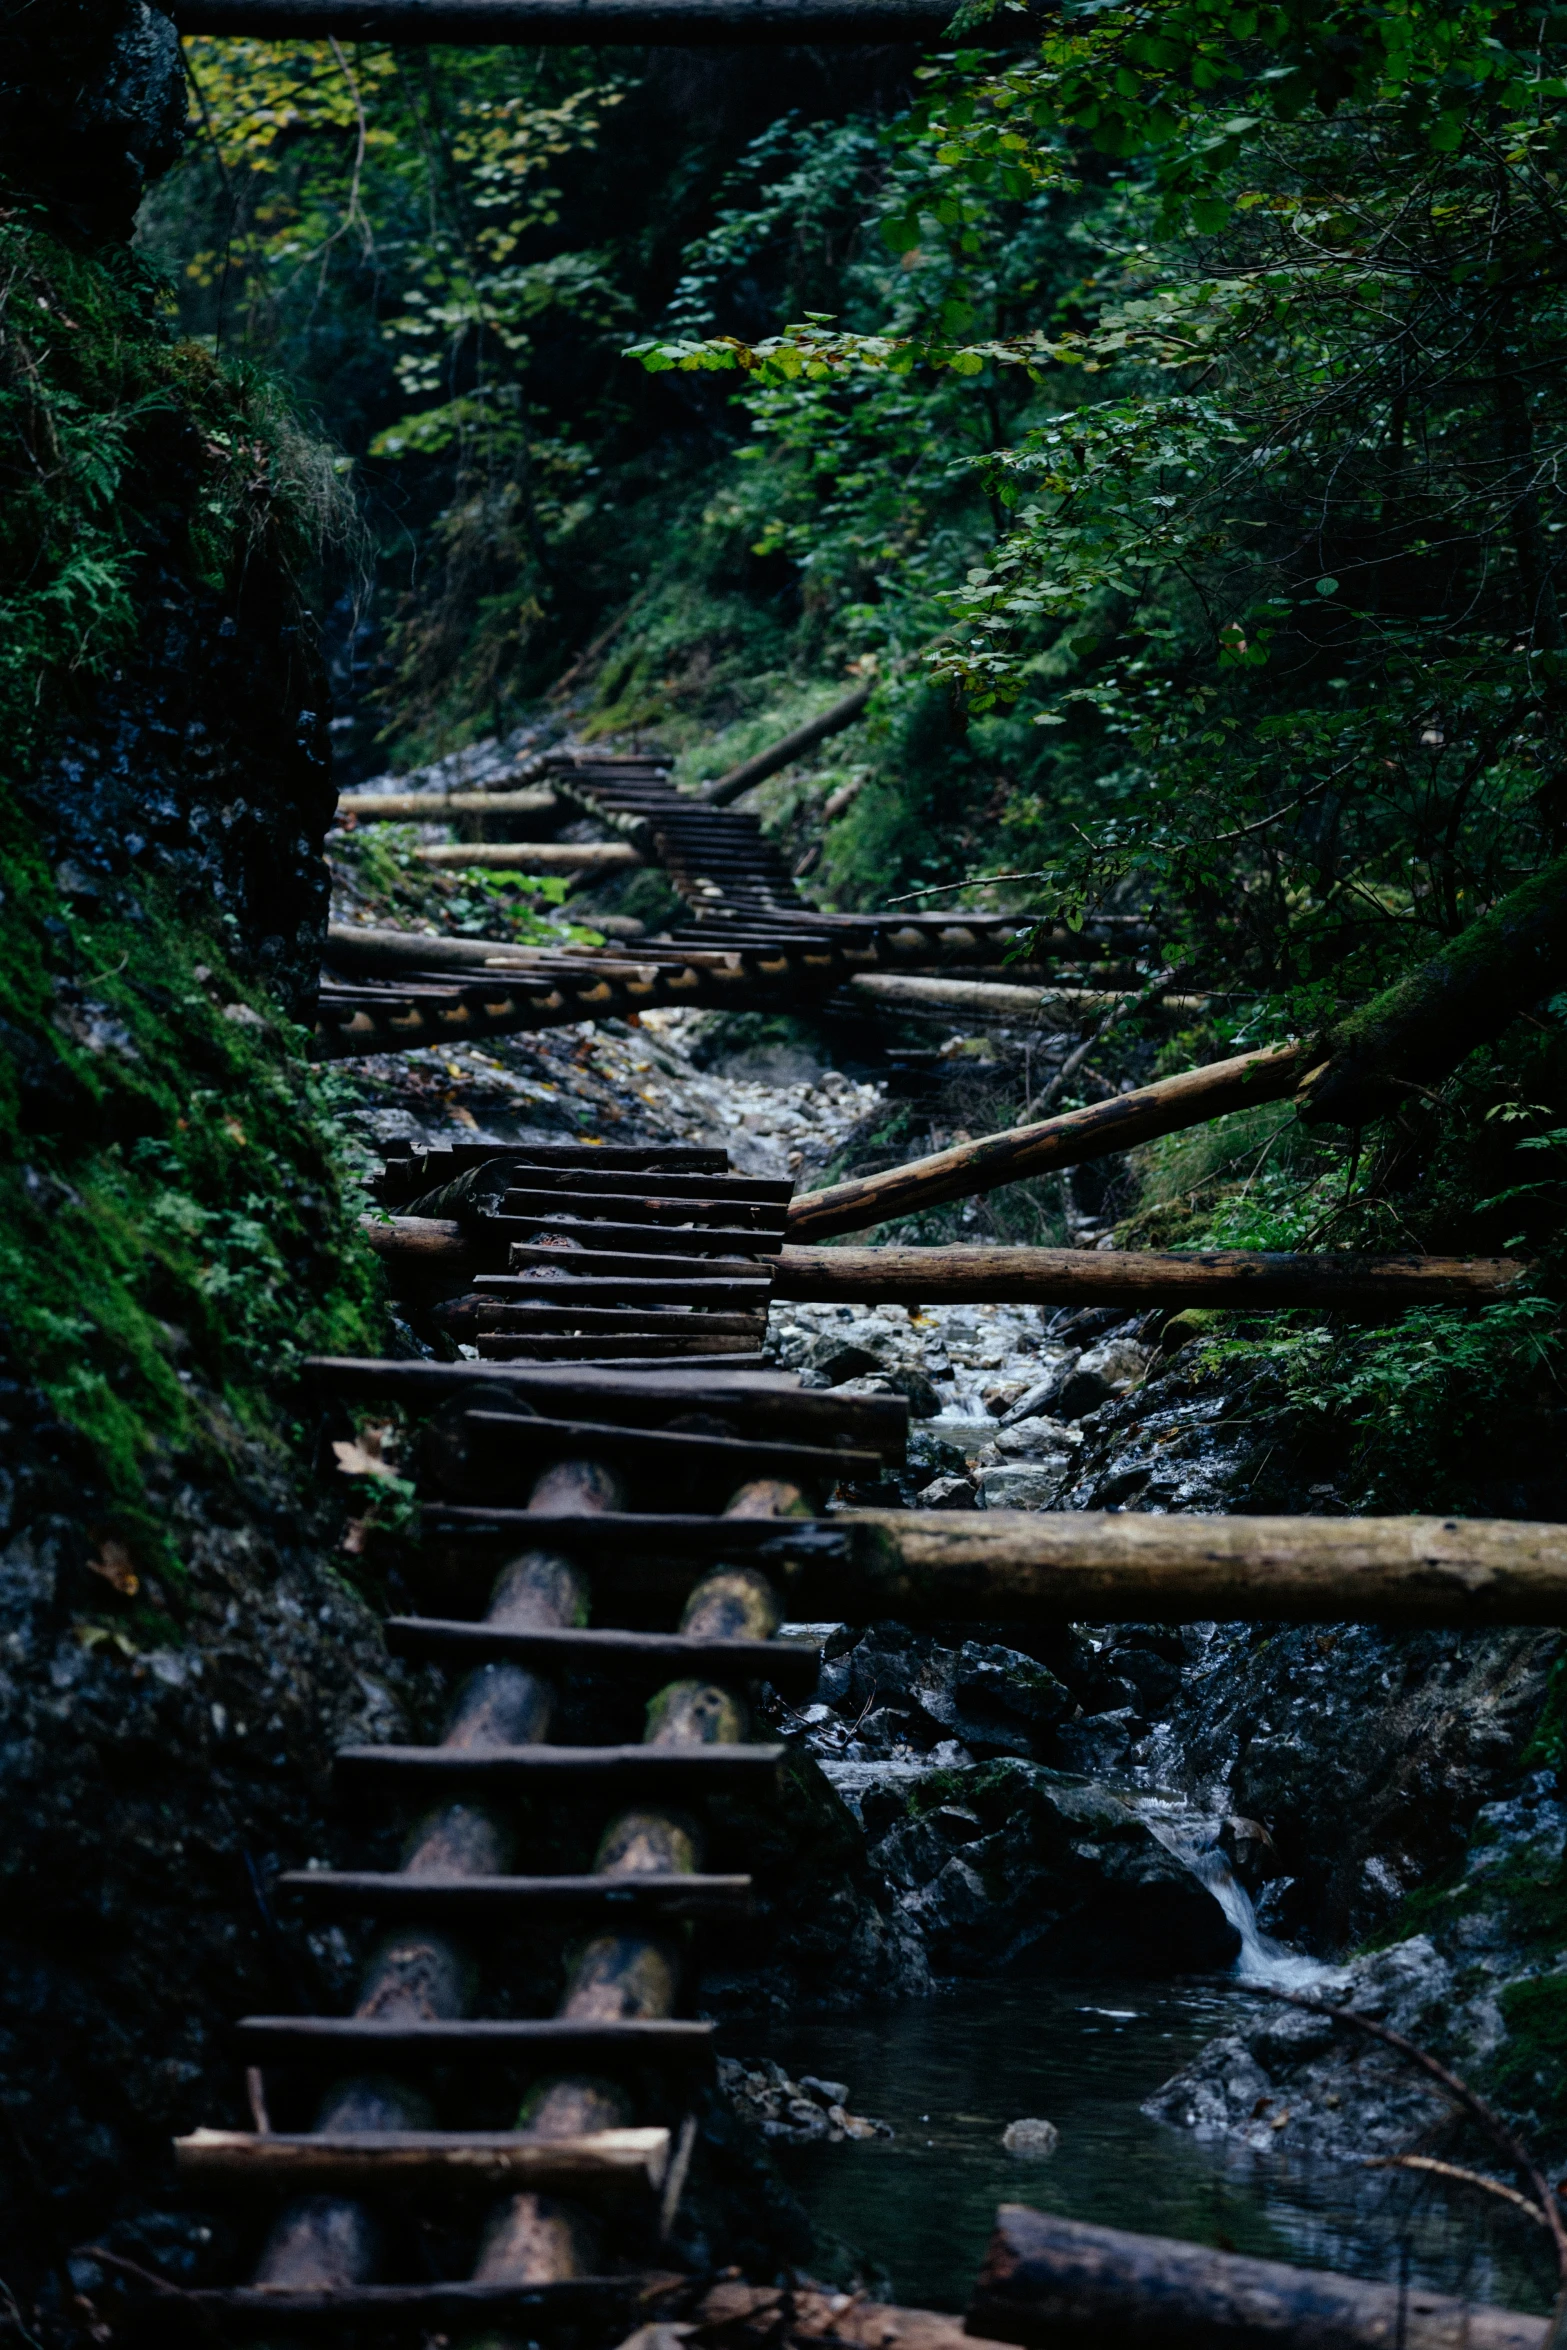 a stair - flight staircase in the middle of a forest